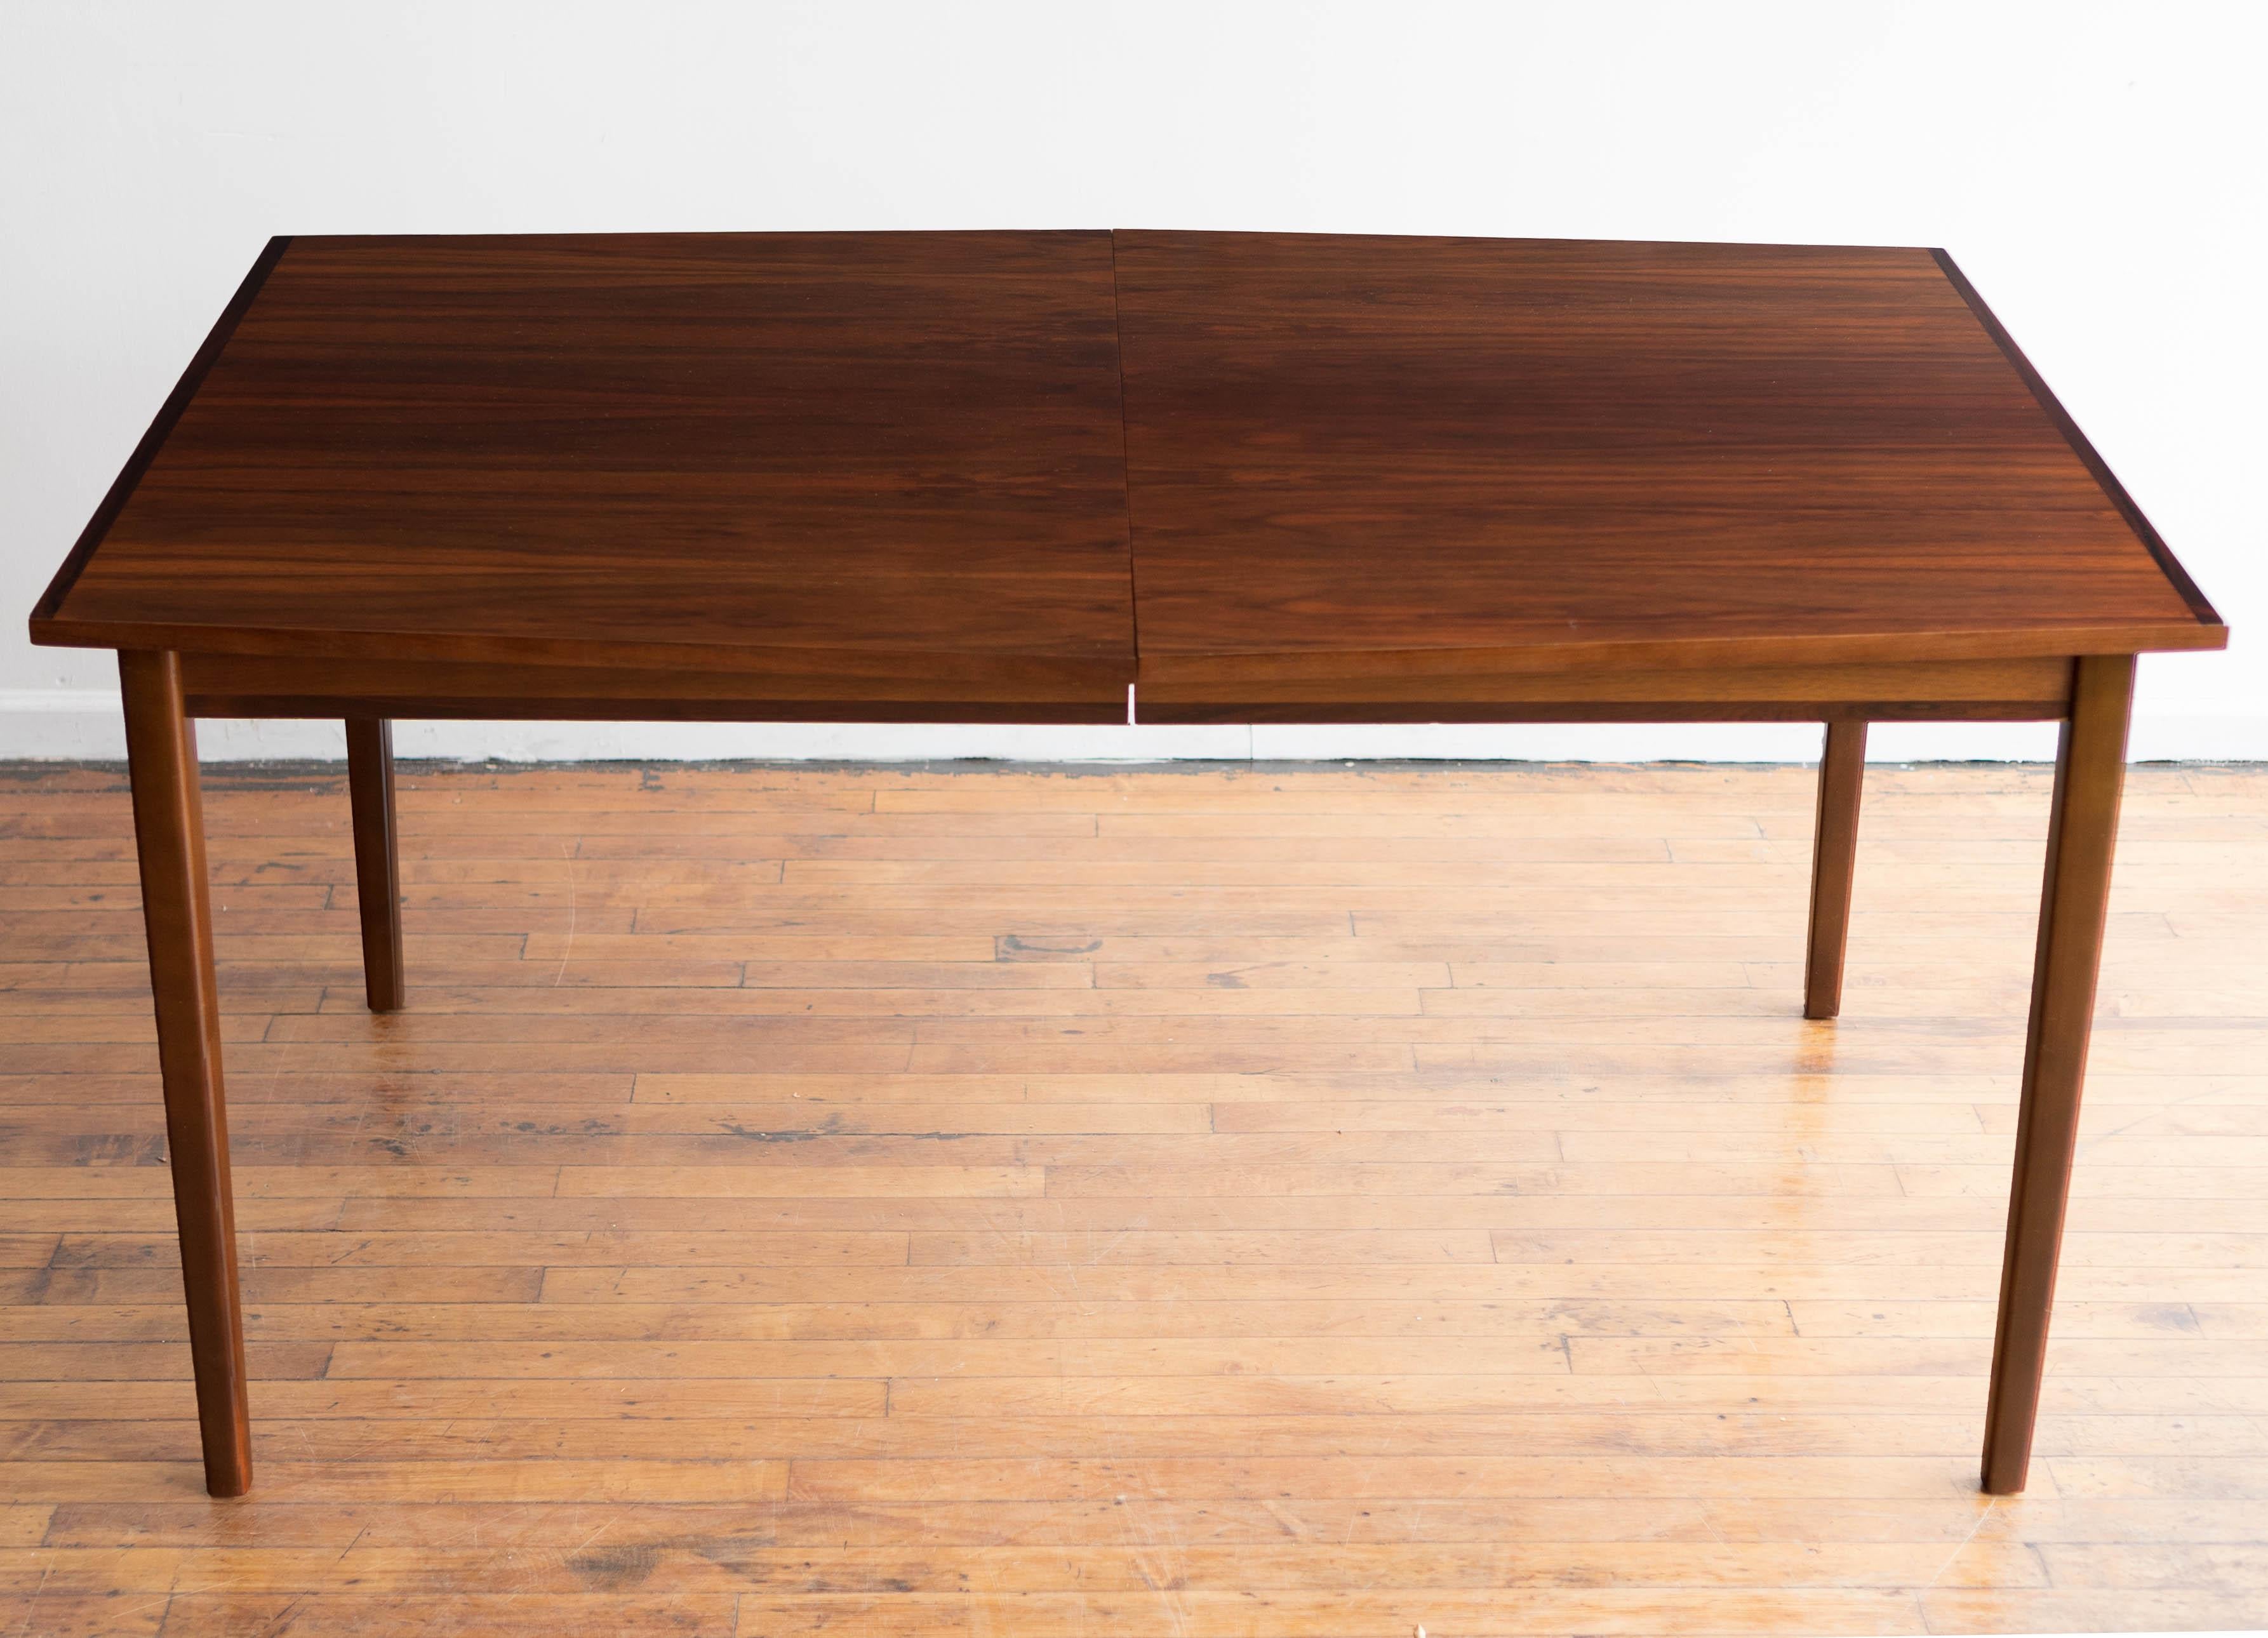 60.5” x 40” x 30.5”H, 26.25” table clearance

Gorgeous surfboard-style Danish rosewood dining table with unique horizontal grain. Tapered legs that can be removed for transport. Fits 4-6 depending on chair style. 

Overall excellent condition with a